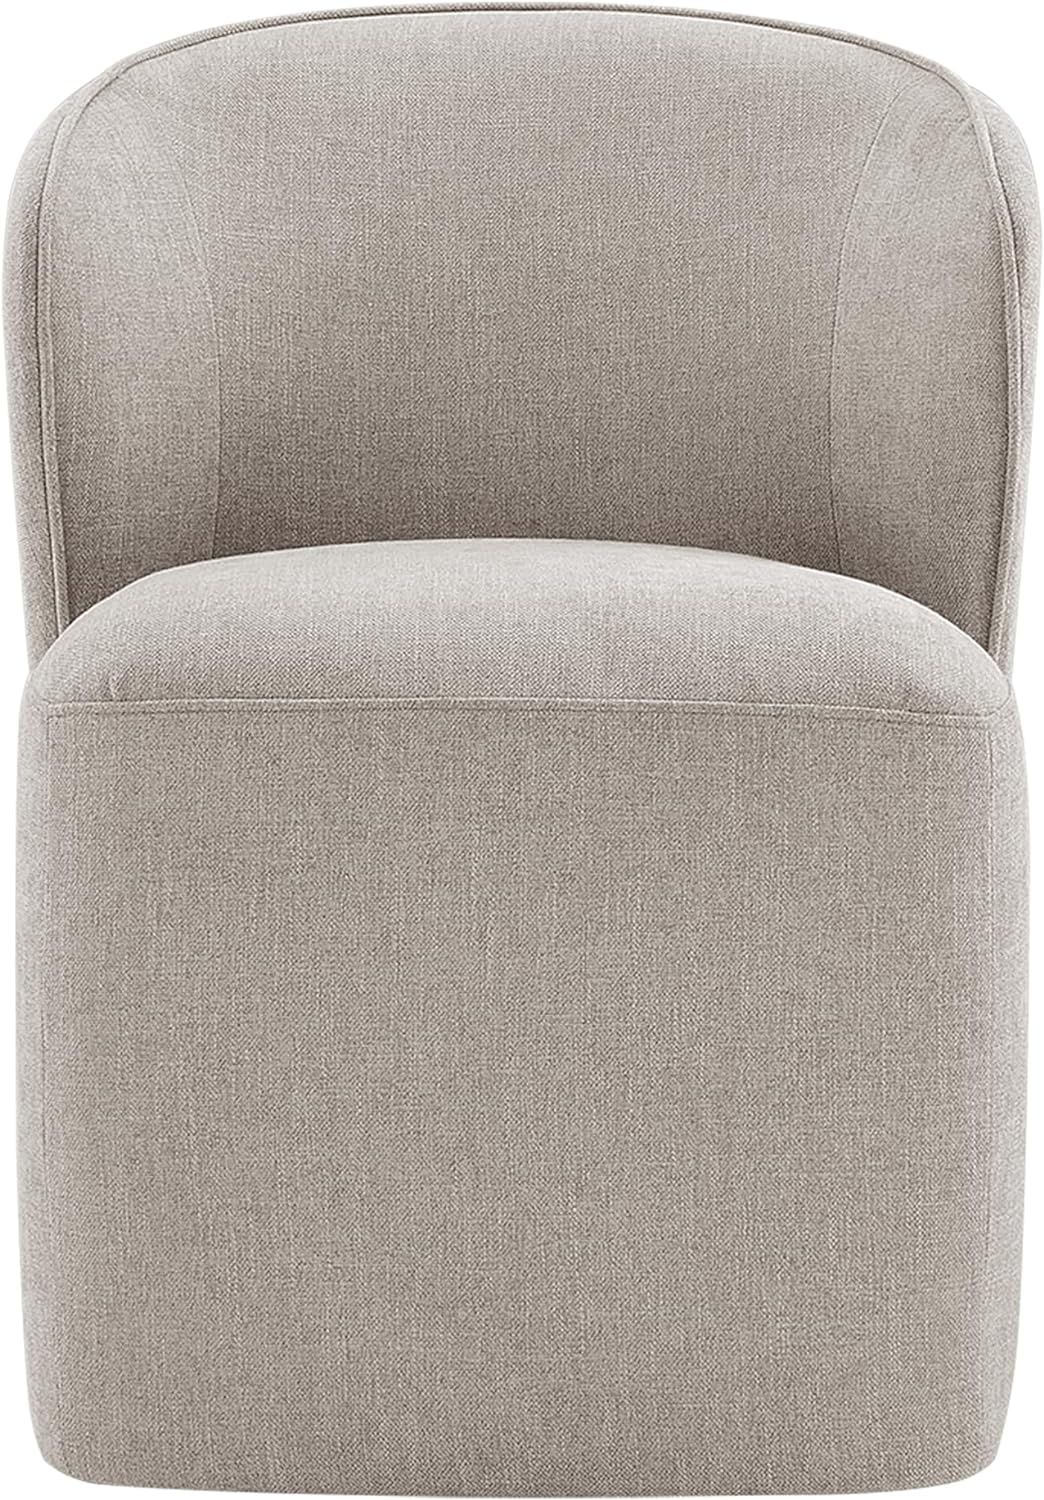 Casters Morden Upholstered Fabric Wingback Armless Chairs for Kitchen Dining Room, 33.1'''H, Beig... | Amazon (US)